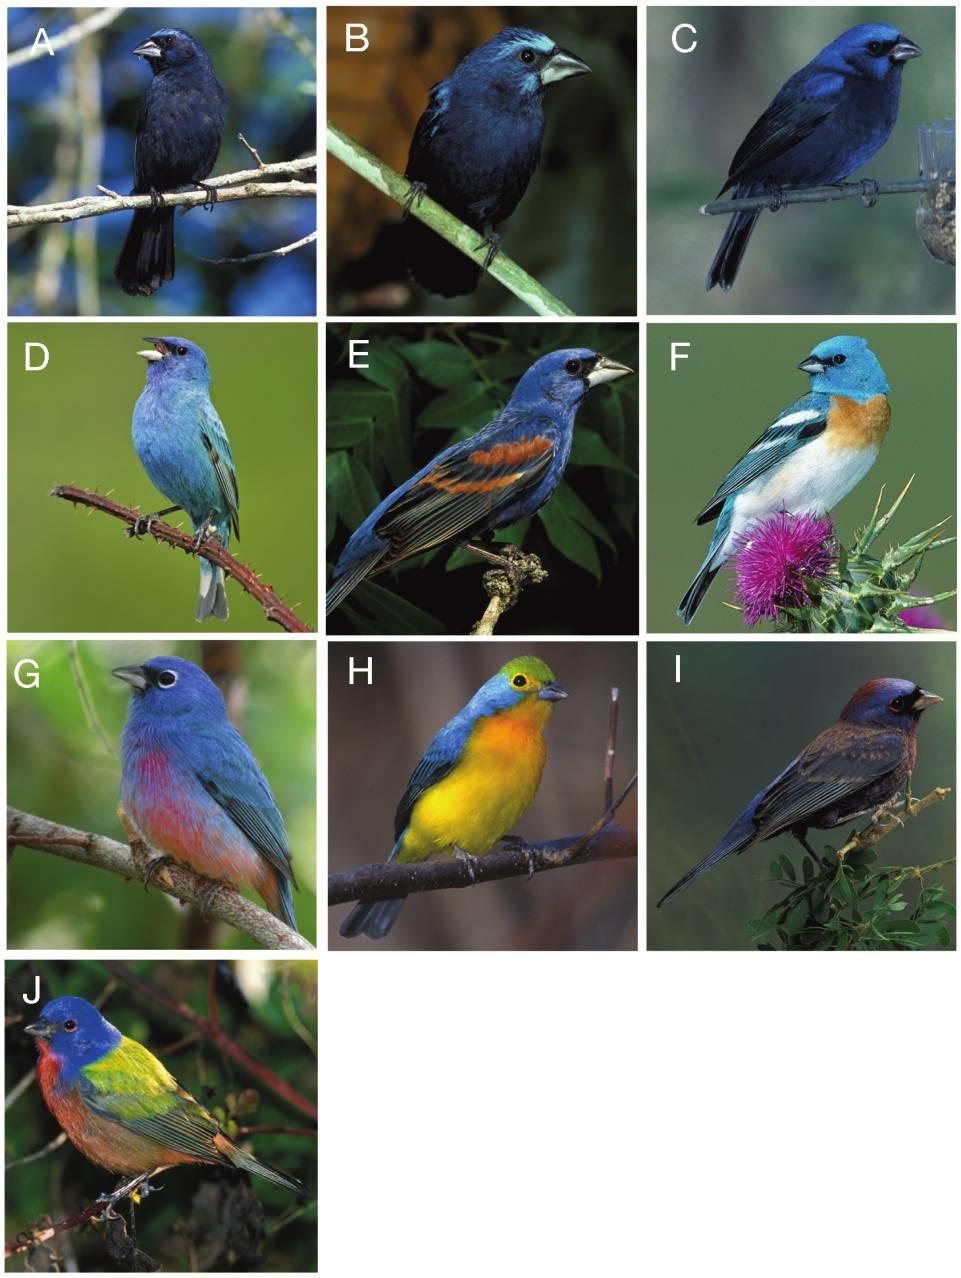 Evolution of Avian Plumage Color 000 Figure 2: Adult male plumages of Cyanocompsa and Passerina buntings (Cardinalidae).